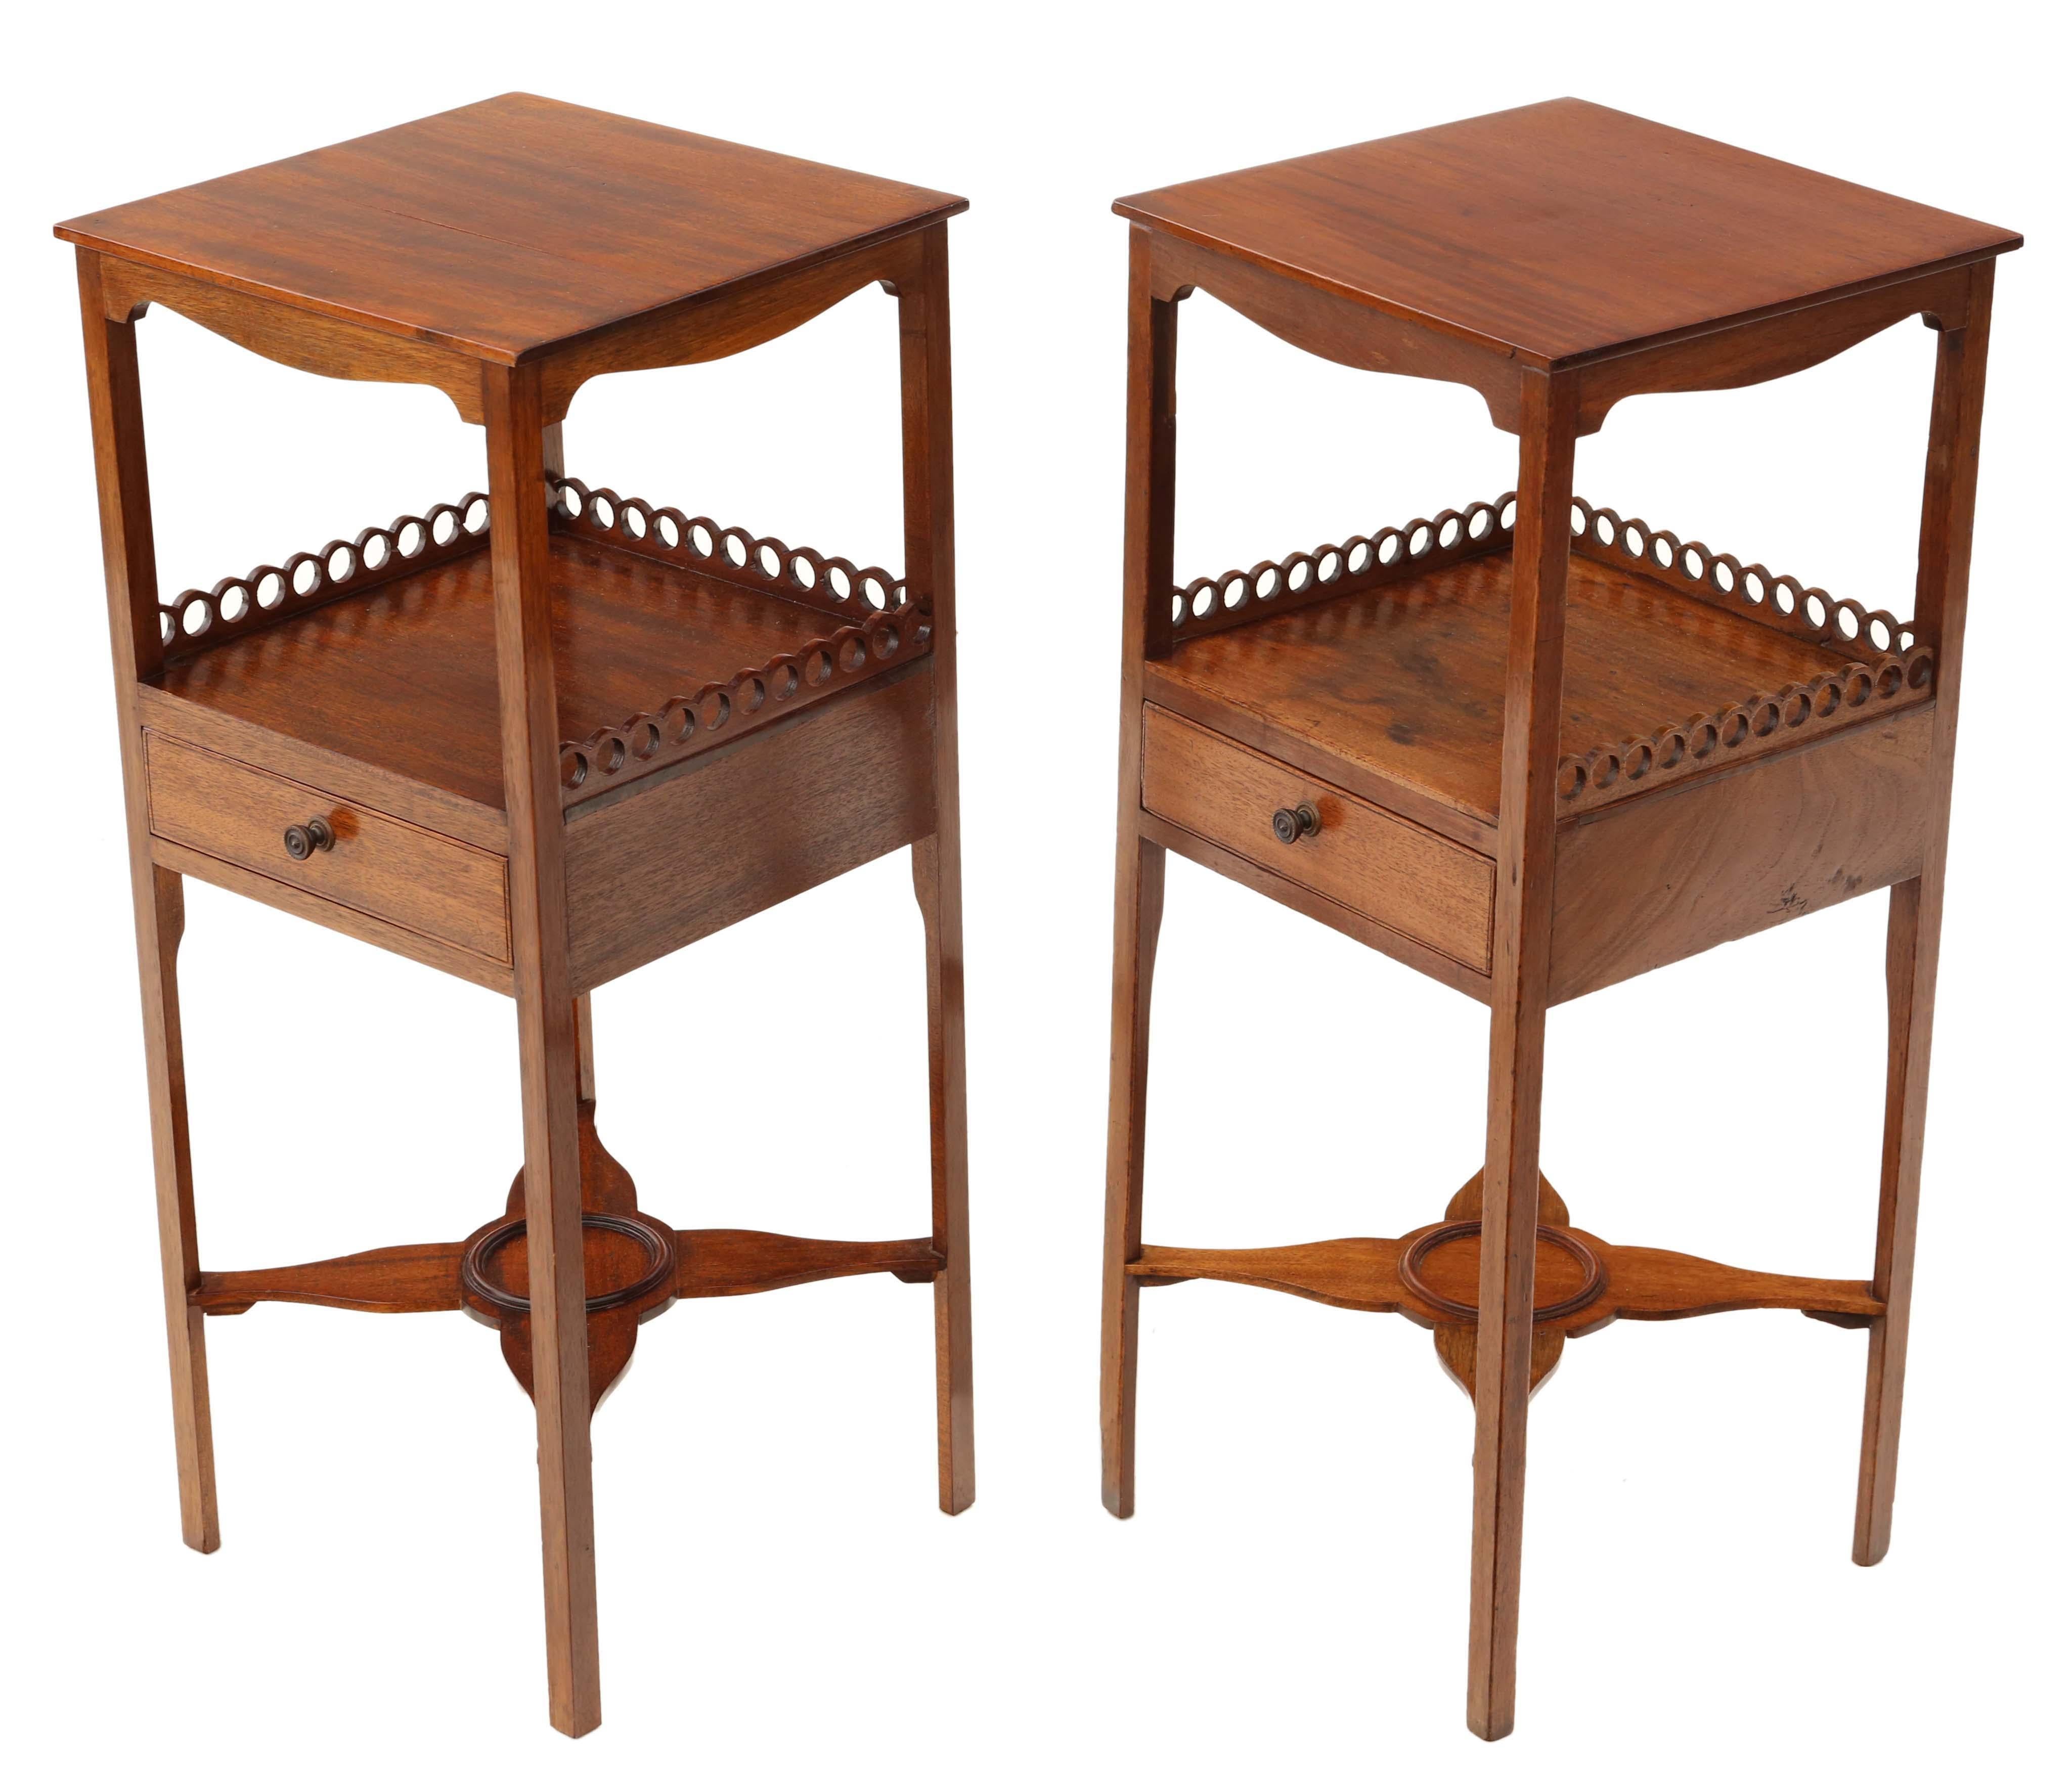 Antique fine quality pair of Georgian early 19th Century mahogany bedside tables.

A fantastic piece with quality and style. Oak lined drawers slide freely.

Attractive fret cut decoration to the back and sides of the undertier (possibly later